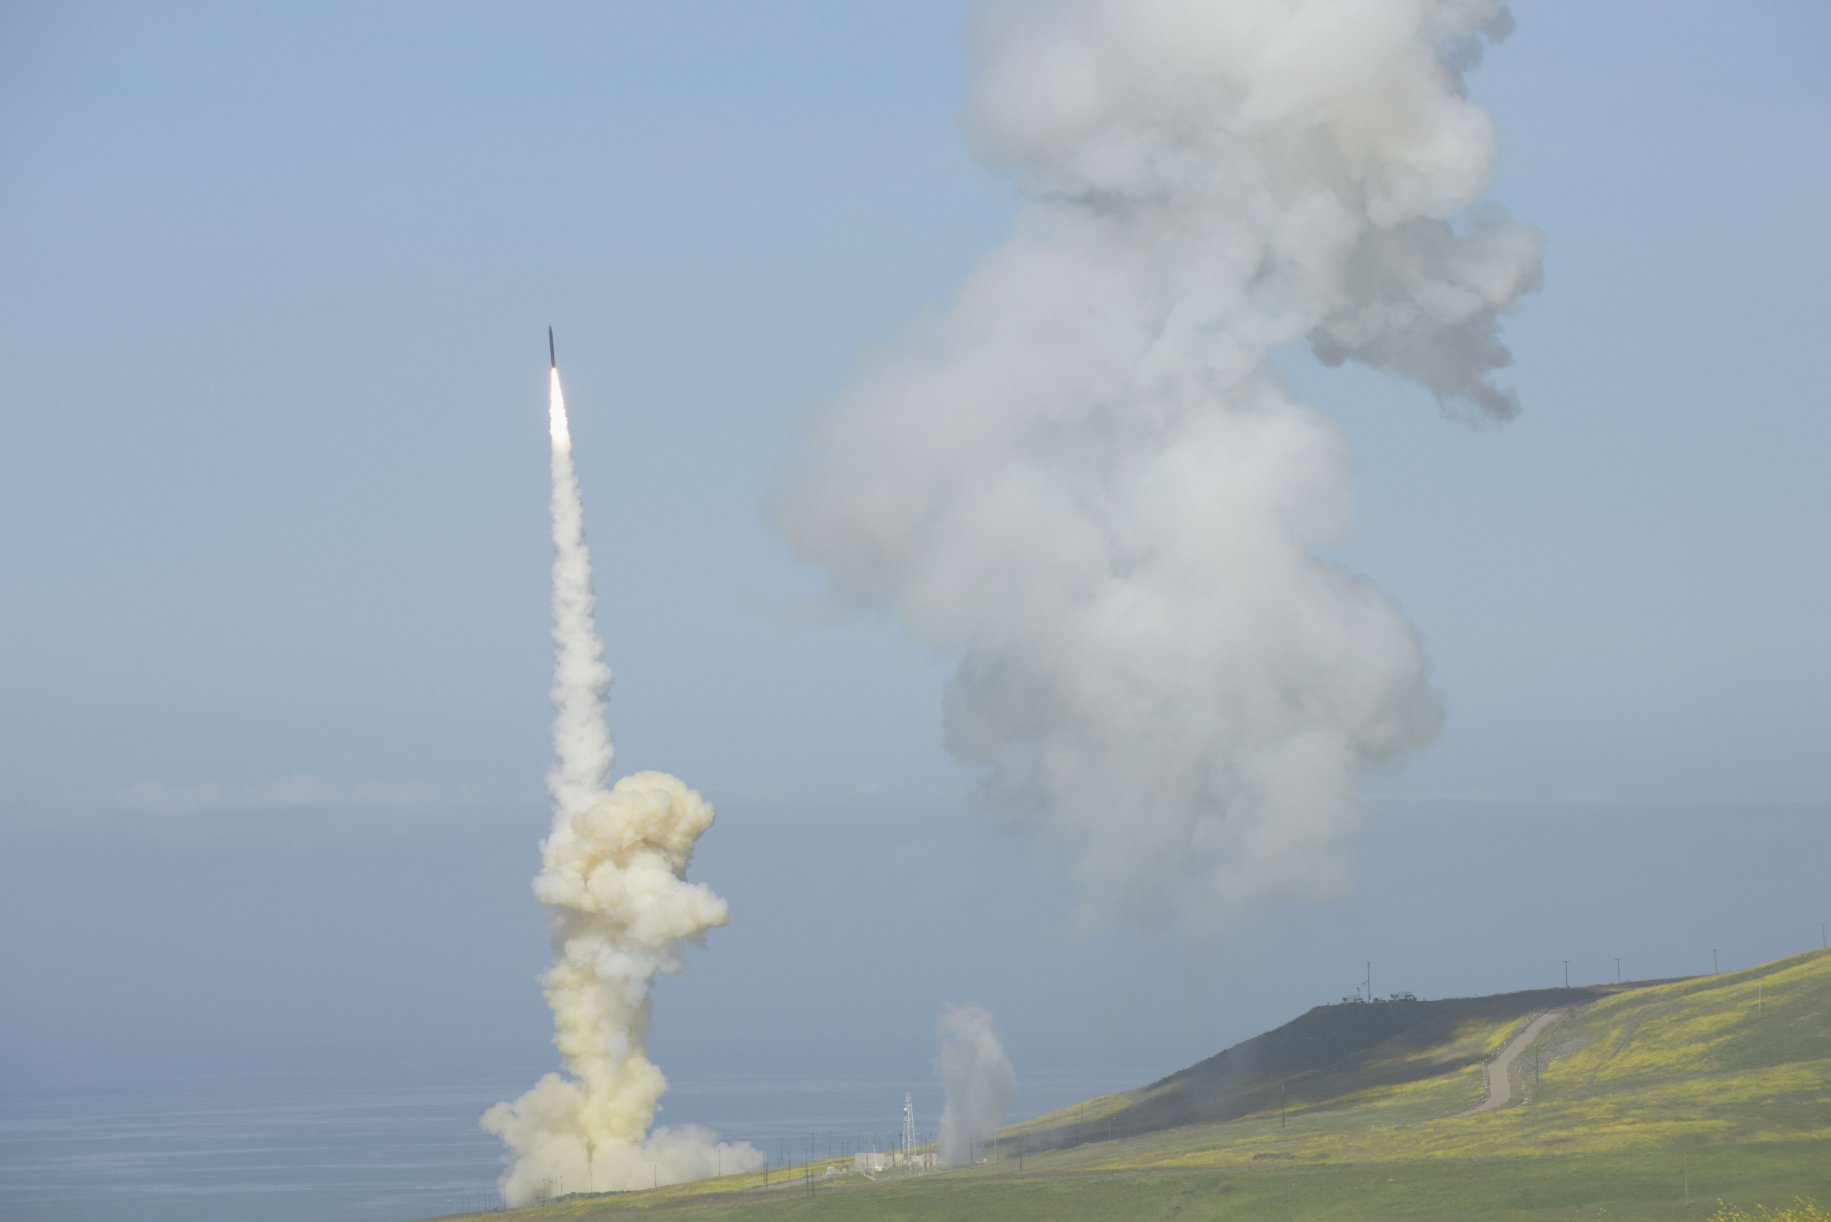 The 'trail' GBI shown launching from Vandenberg Air Force Base about 50 seconds after the ‘lead’ GBI, in the system’s first-ever salvo engagement. (US MDA)